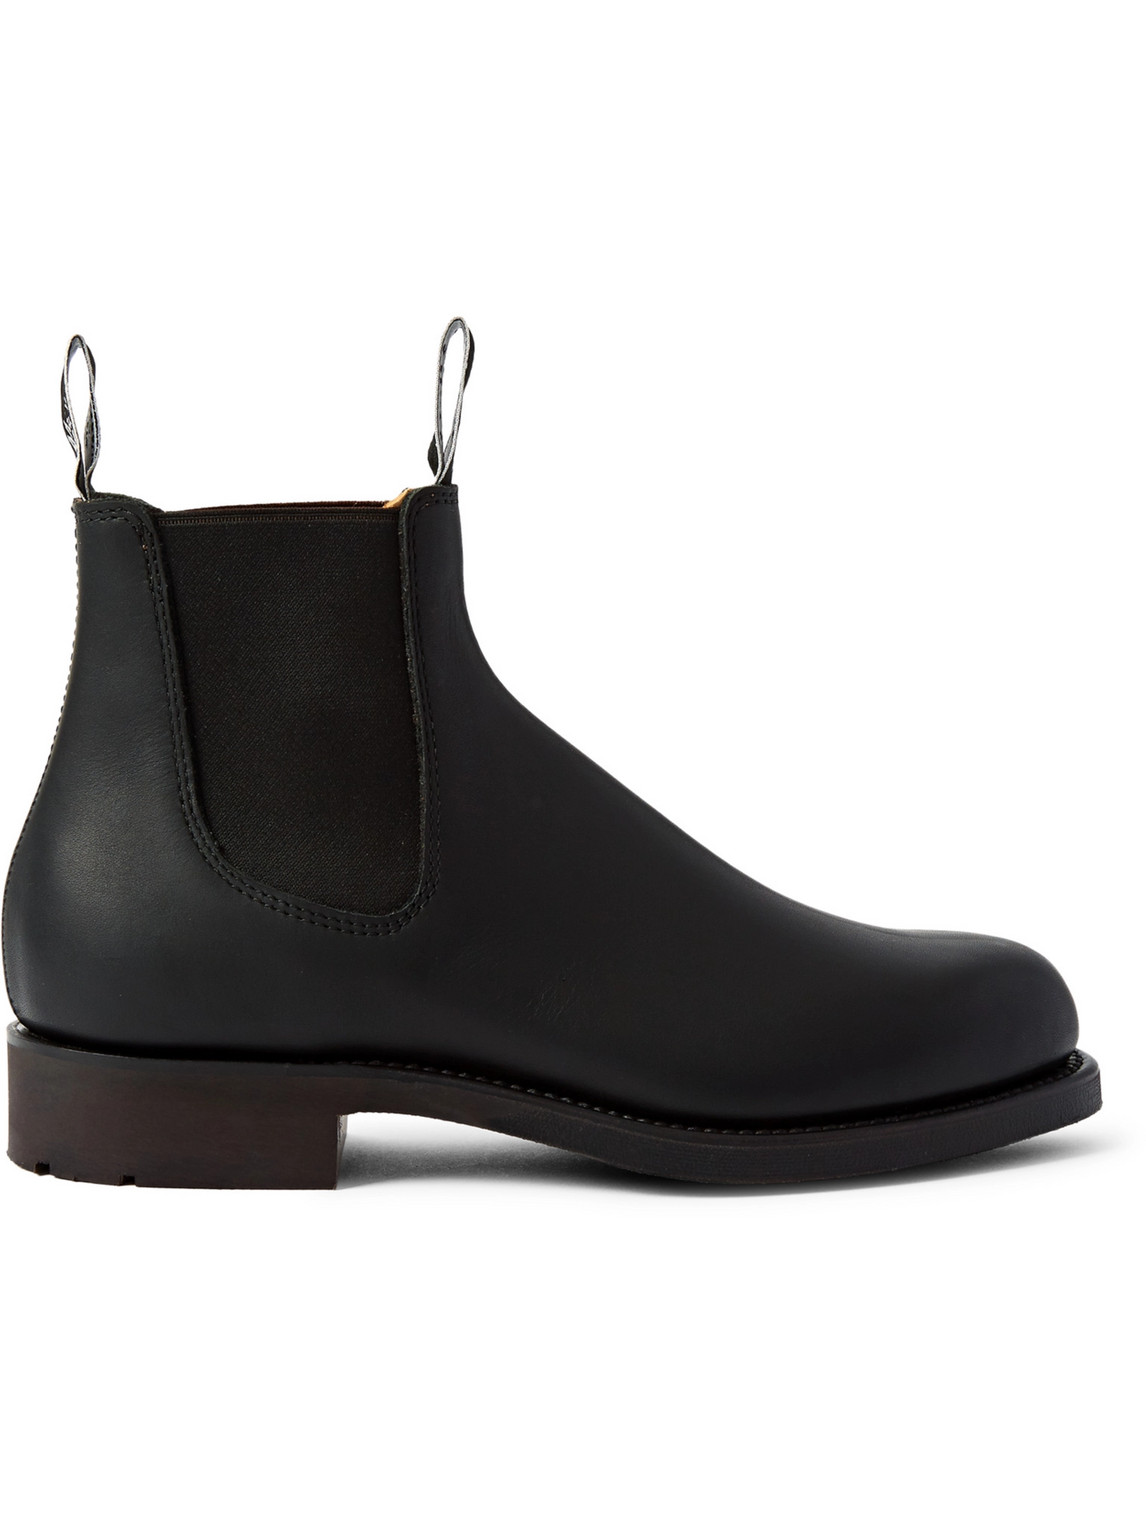 R.m.williams Gardener Whole-cut Leather Chelsea Boots In Black